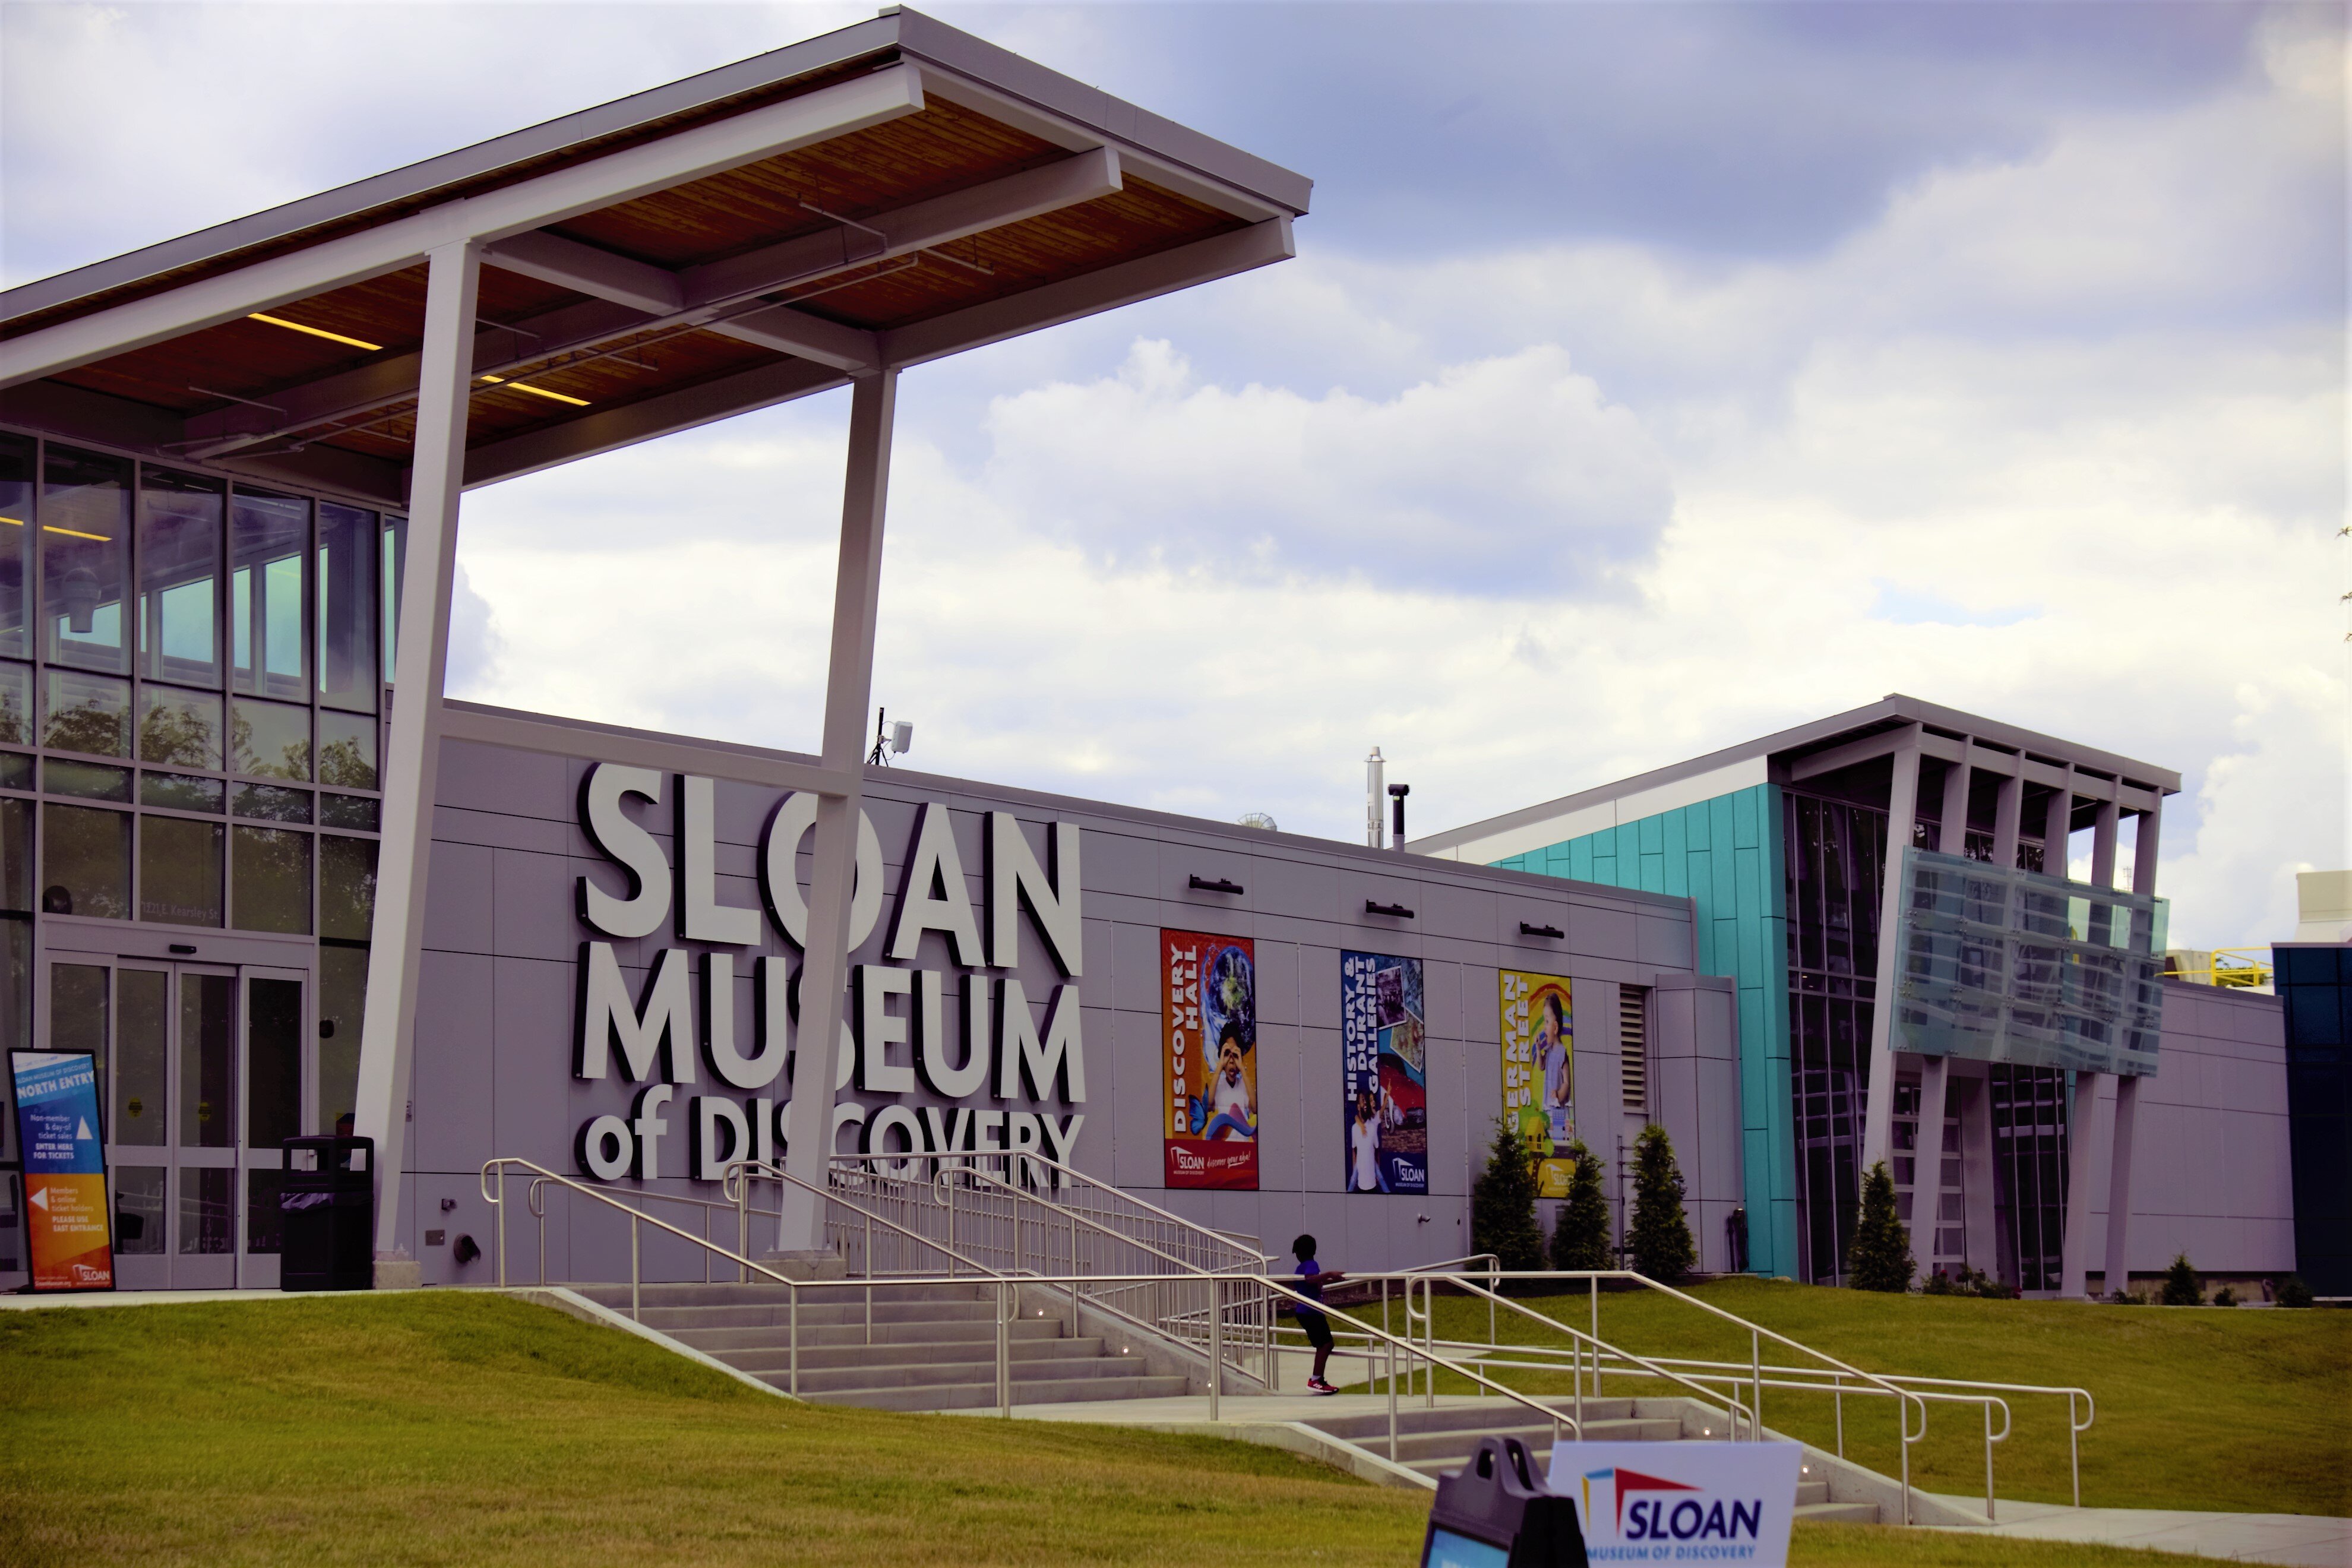 The Sloan Museum of Discovery is located within the Flint Cultural Center at 1221 E. Kearsley St. in Flint, MI.